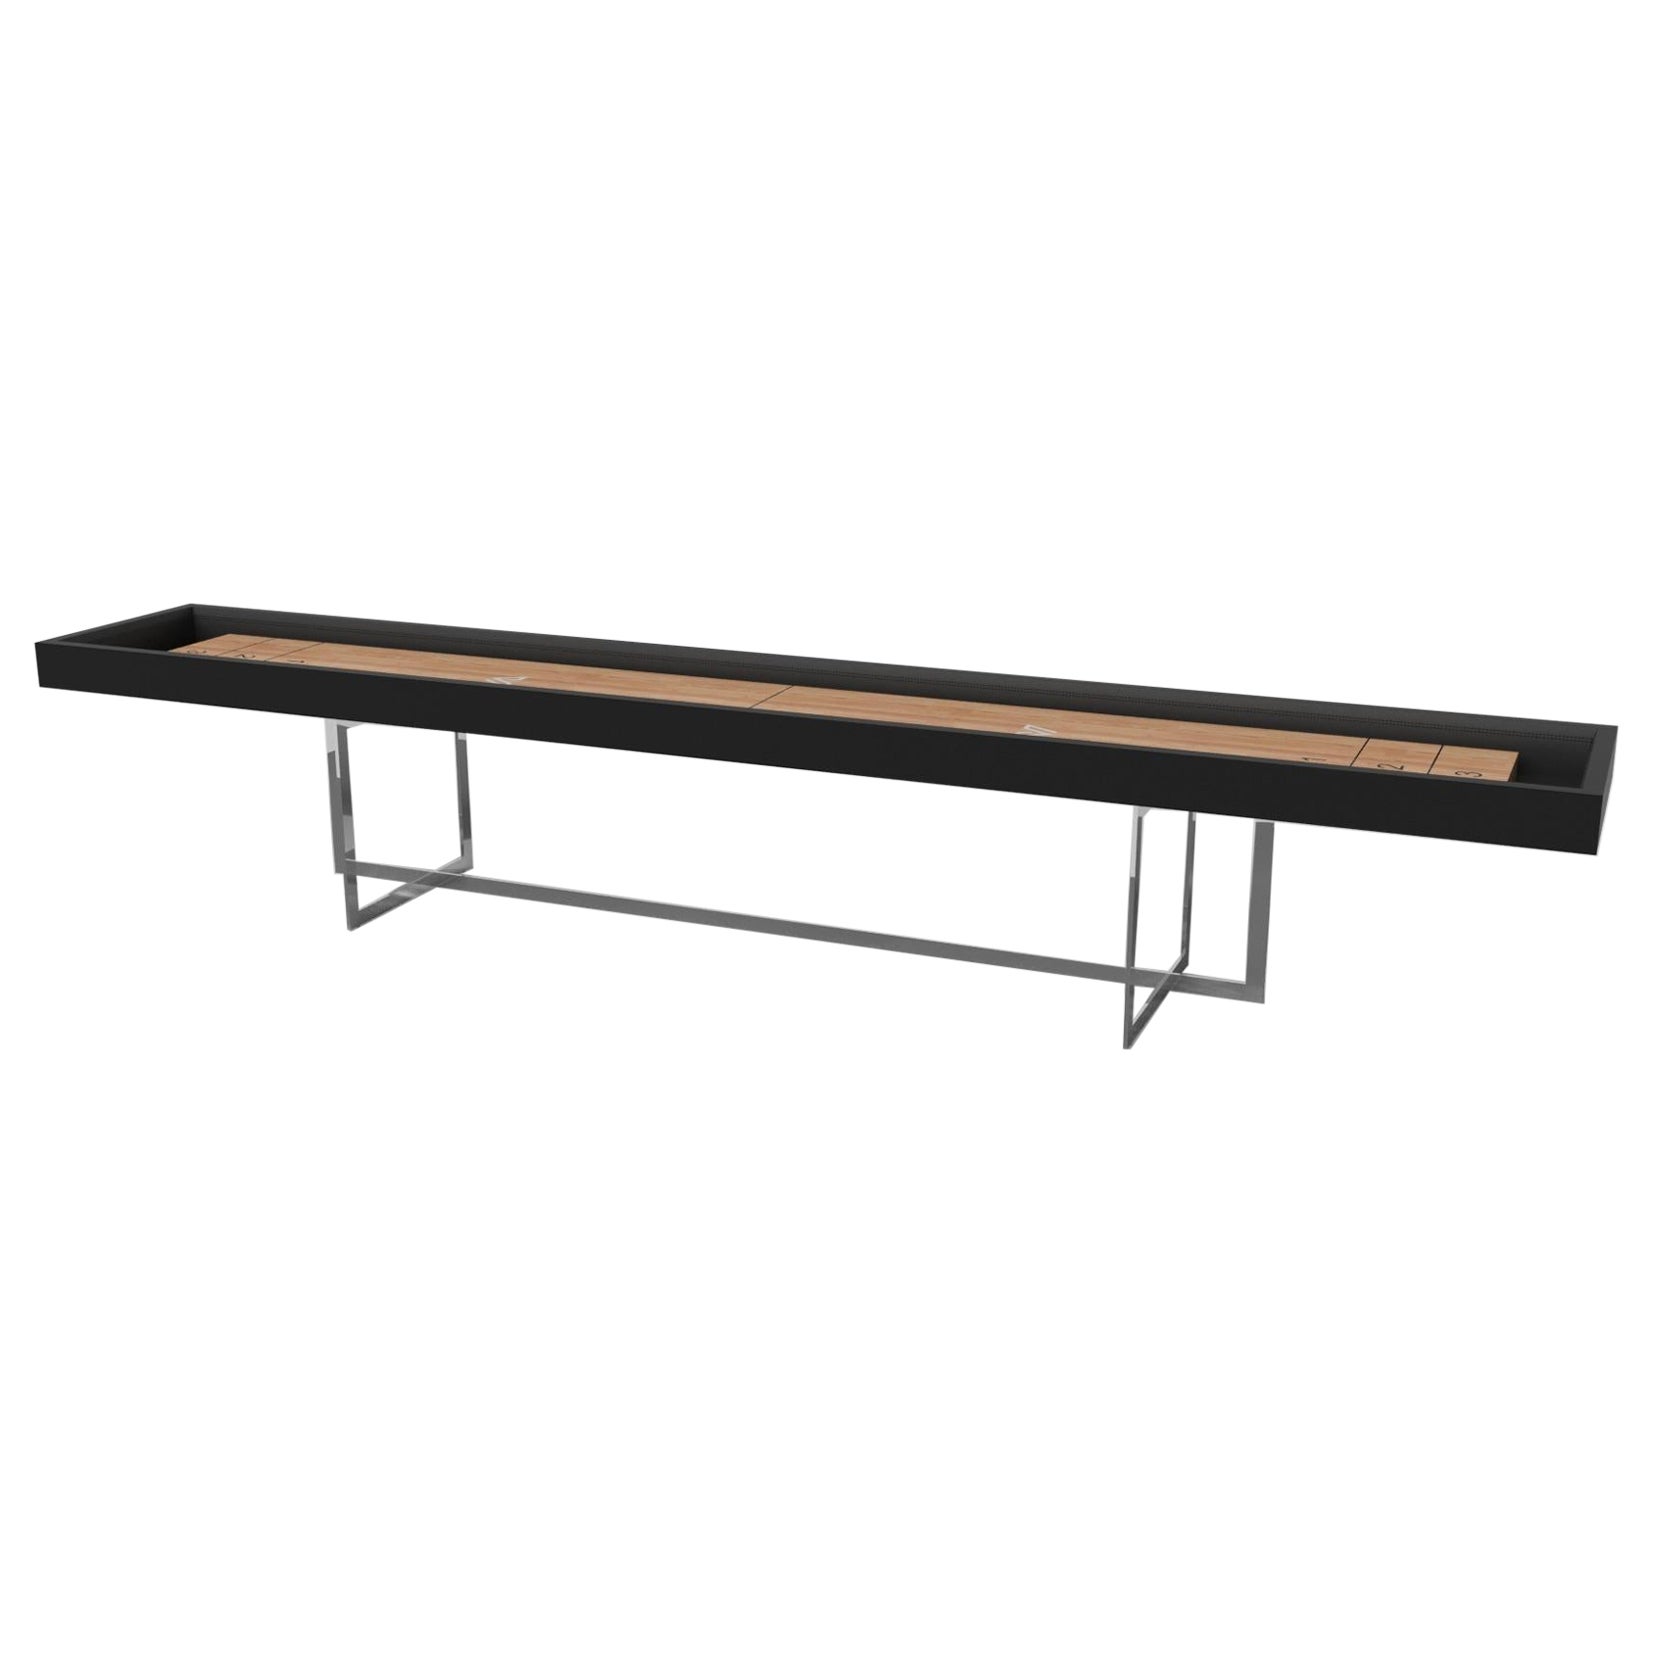 Elevate Customs Beso Shuffleboard Tables / Solid Pantone Black Color in 18' -USA